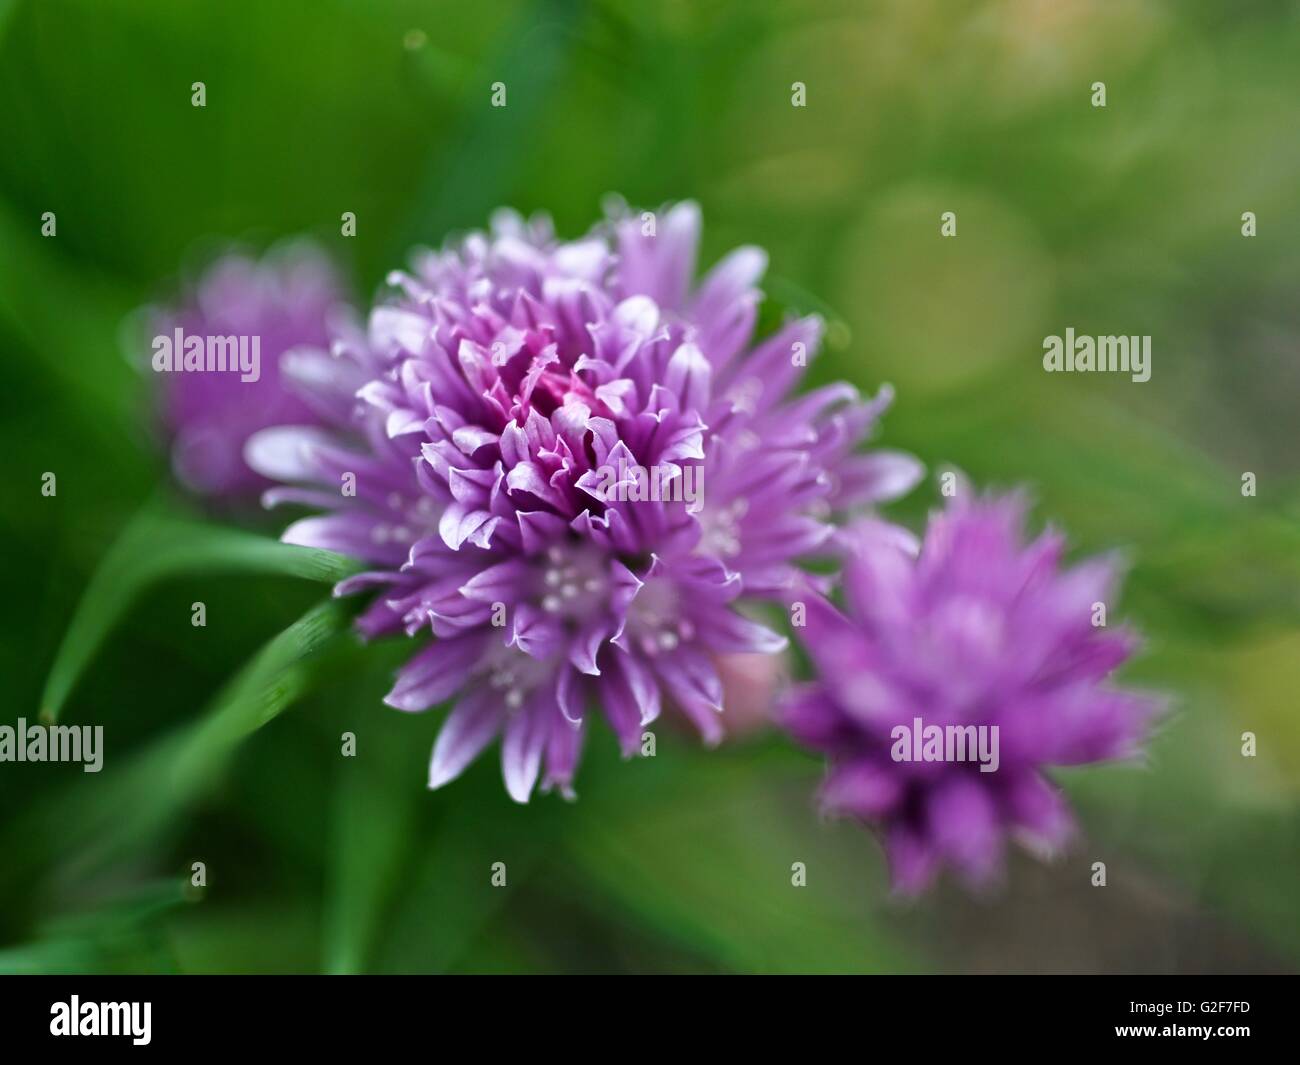 Globe Amaranth - Chives with purple flowers Stock Photo